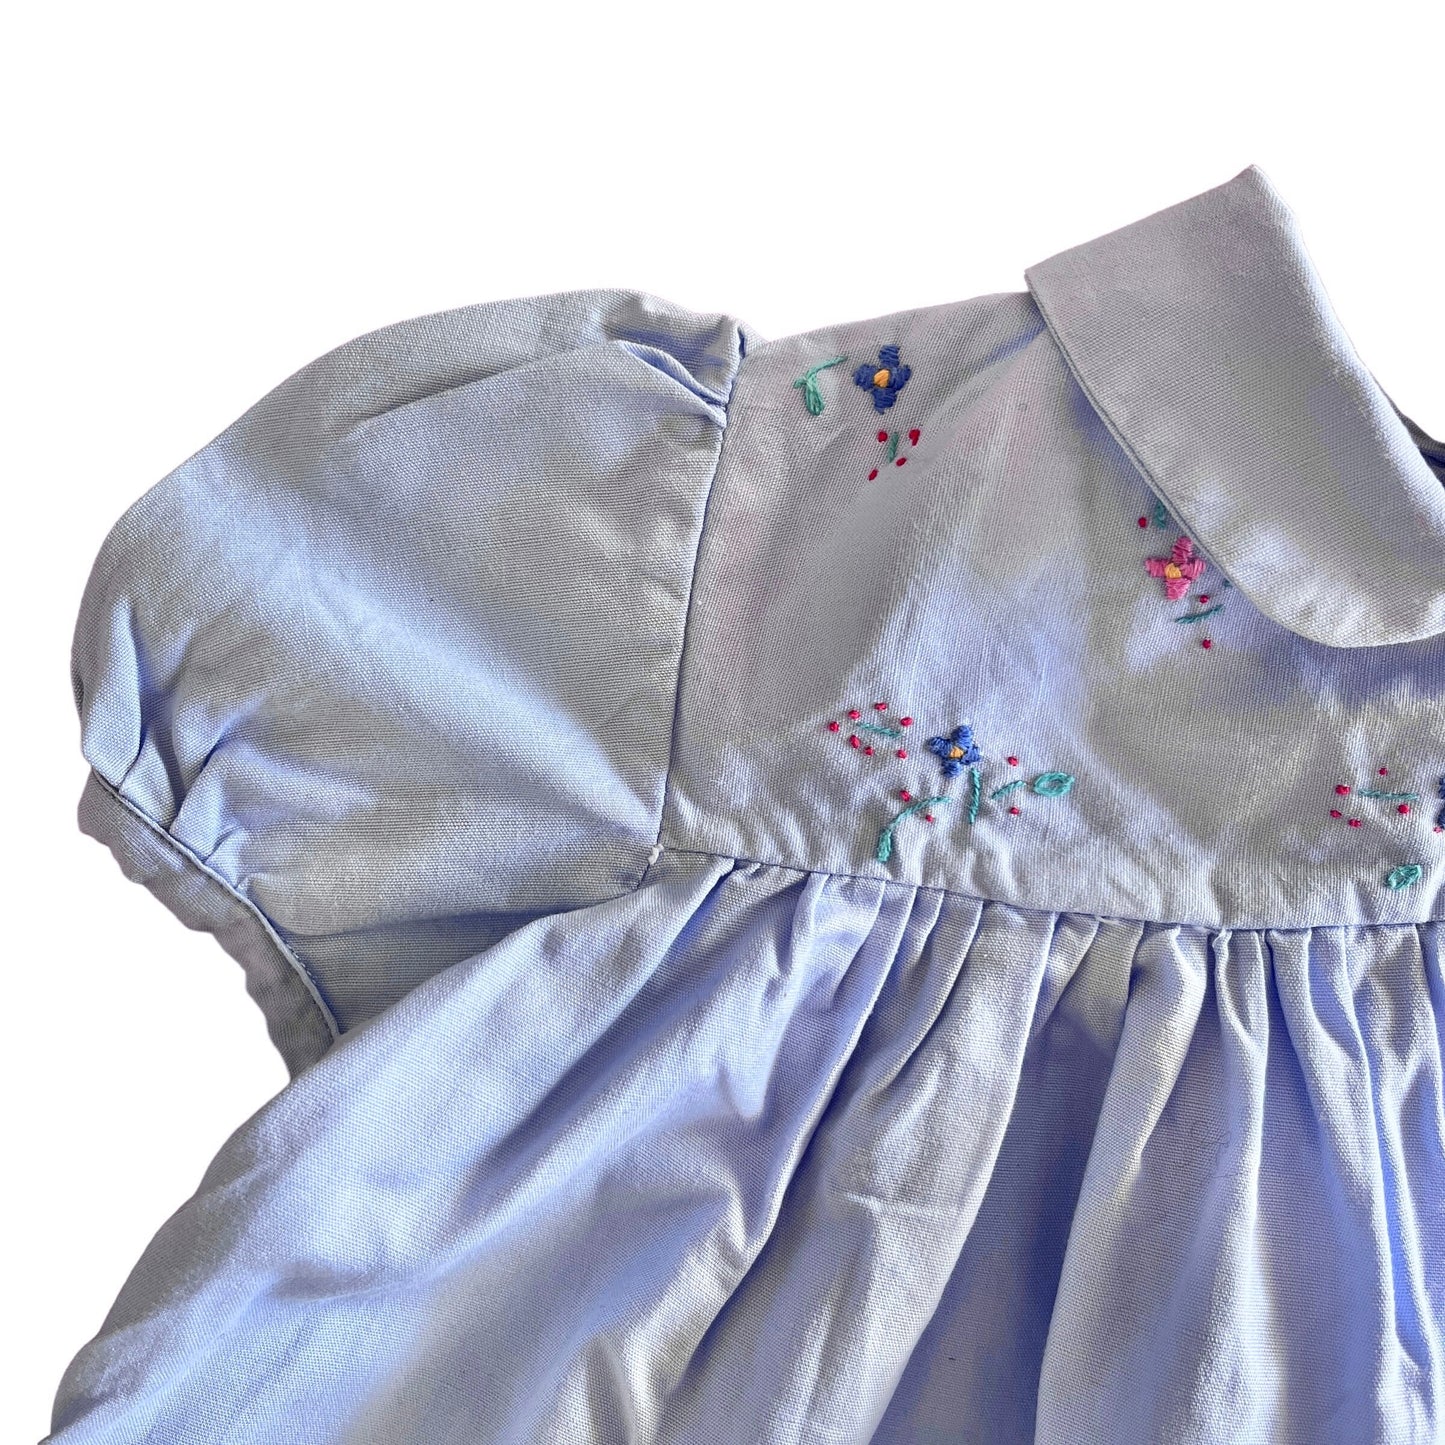 1960s Embroidered Blue Dress 6-9 Months